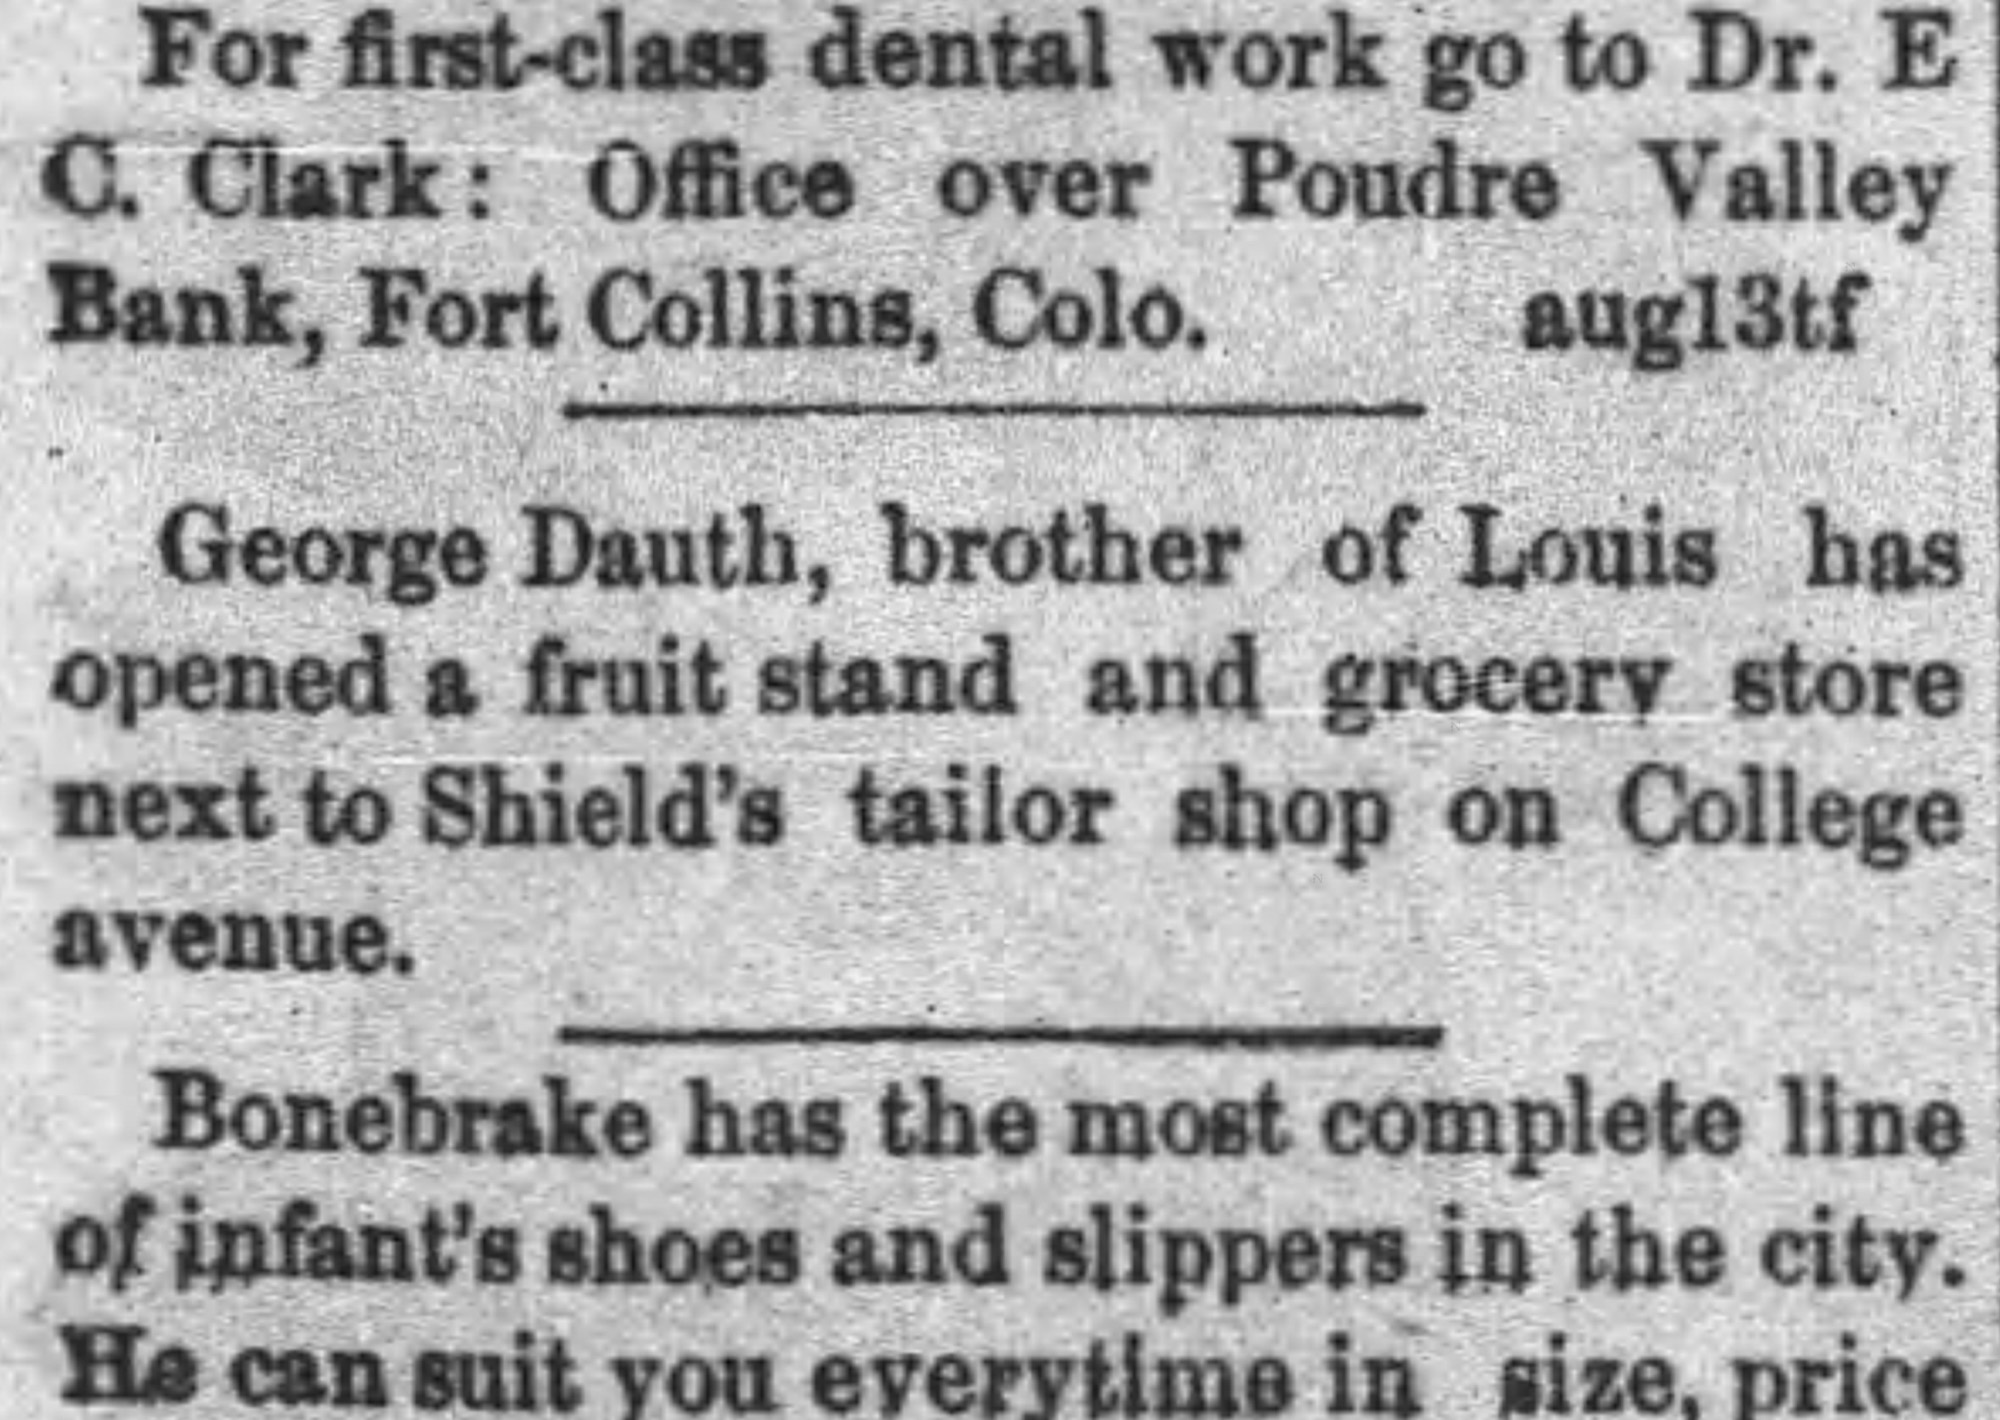 Dauth Family Archive - 1885-08-01 - The Fort Collins Express - George Dauth Opens Grocery